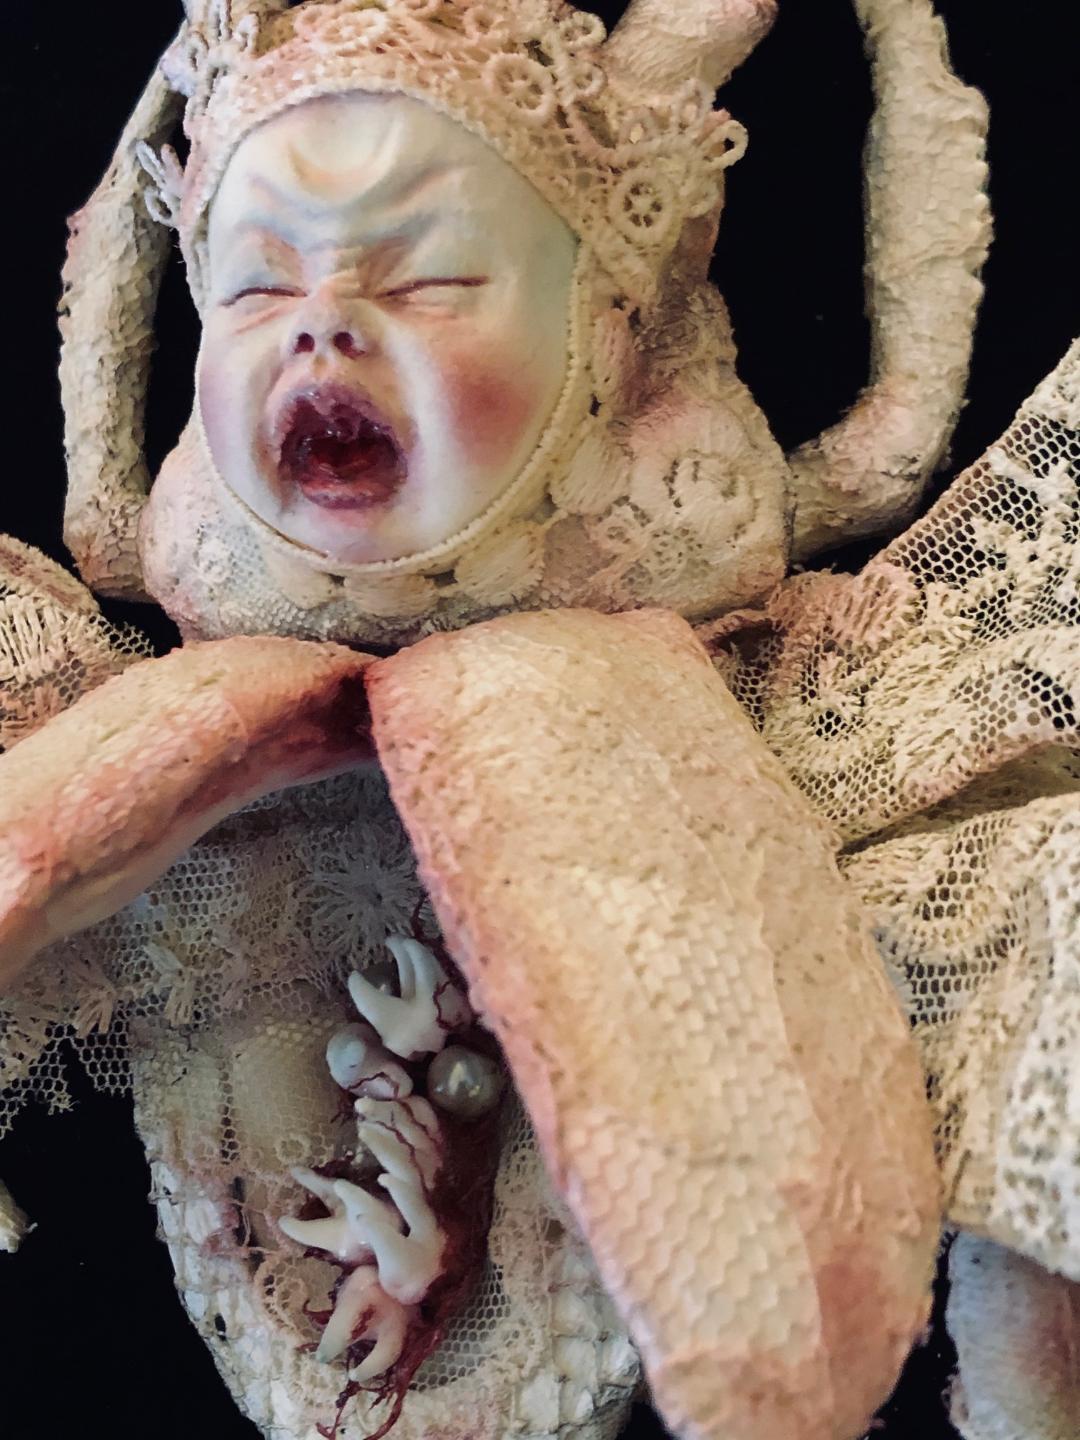 close up mixed media assemblage crying baby paper, teeth and lace sculpted beetle by artist Stefanie Vega